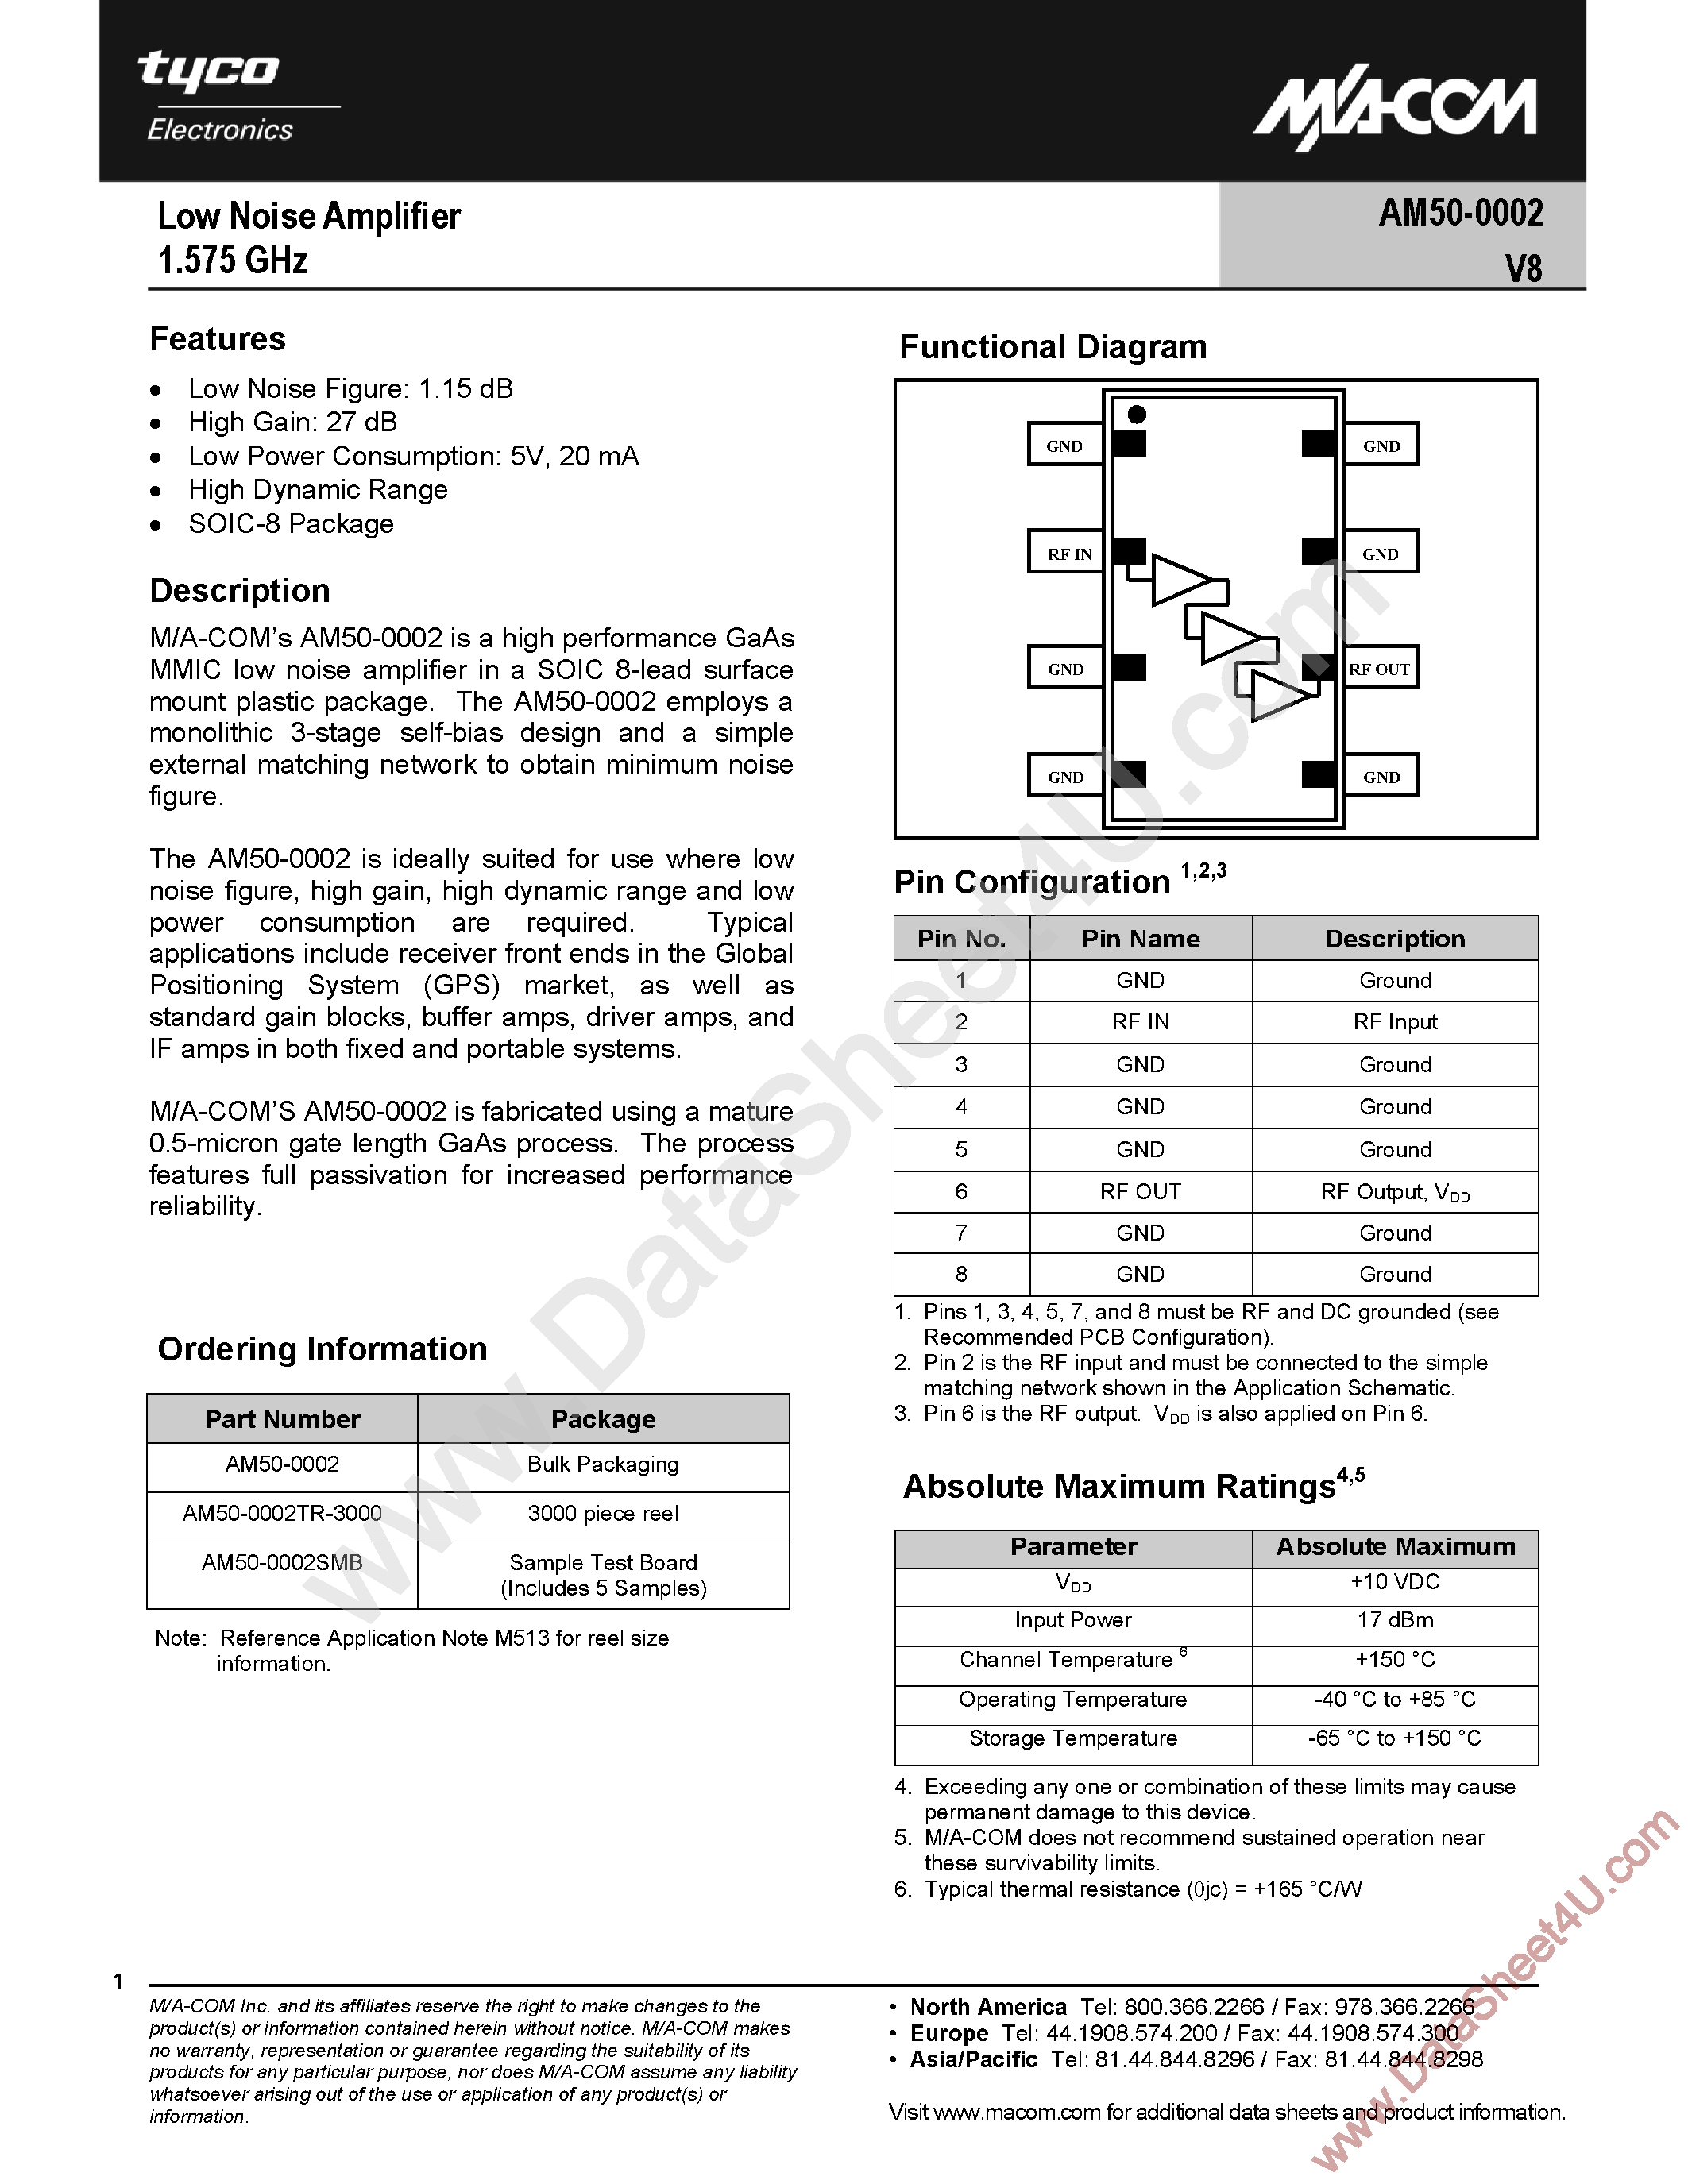 Datasheet AM50-0002V8 - Low Noise Amplifier page 1